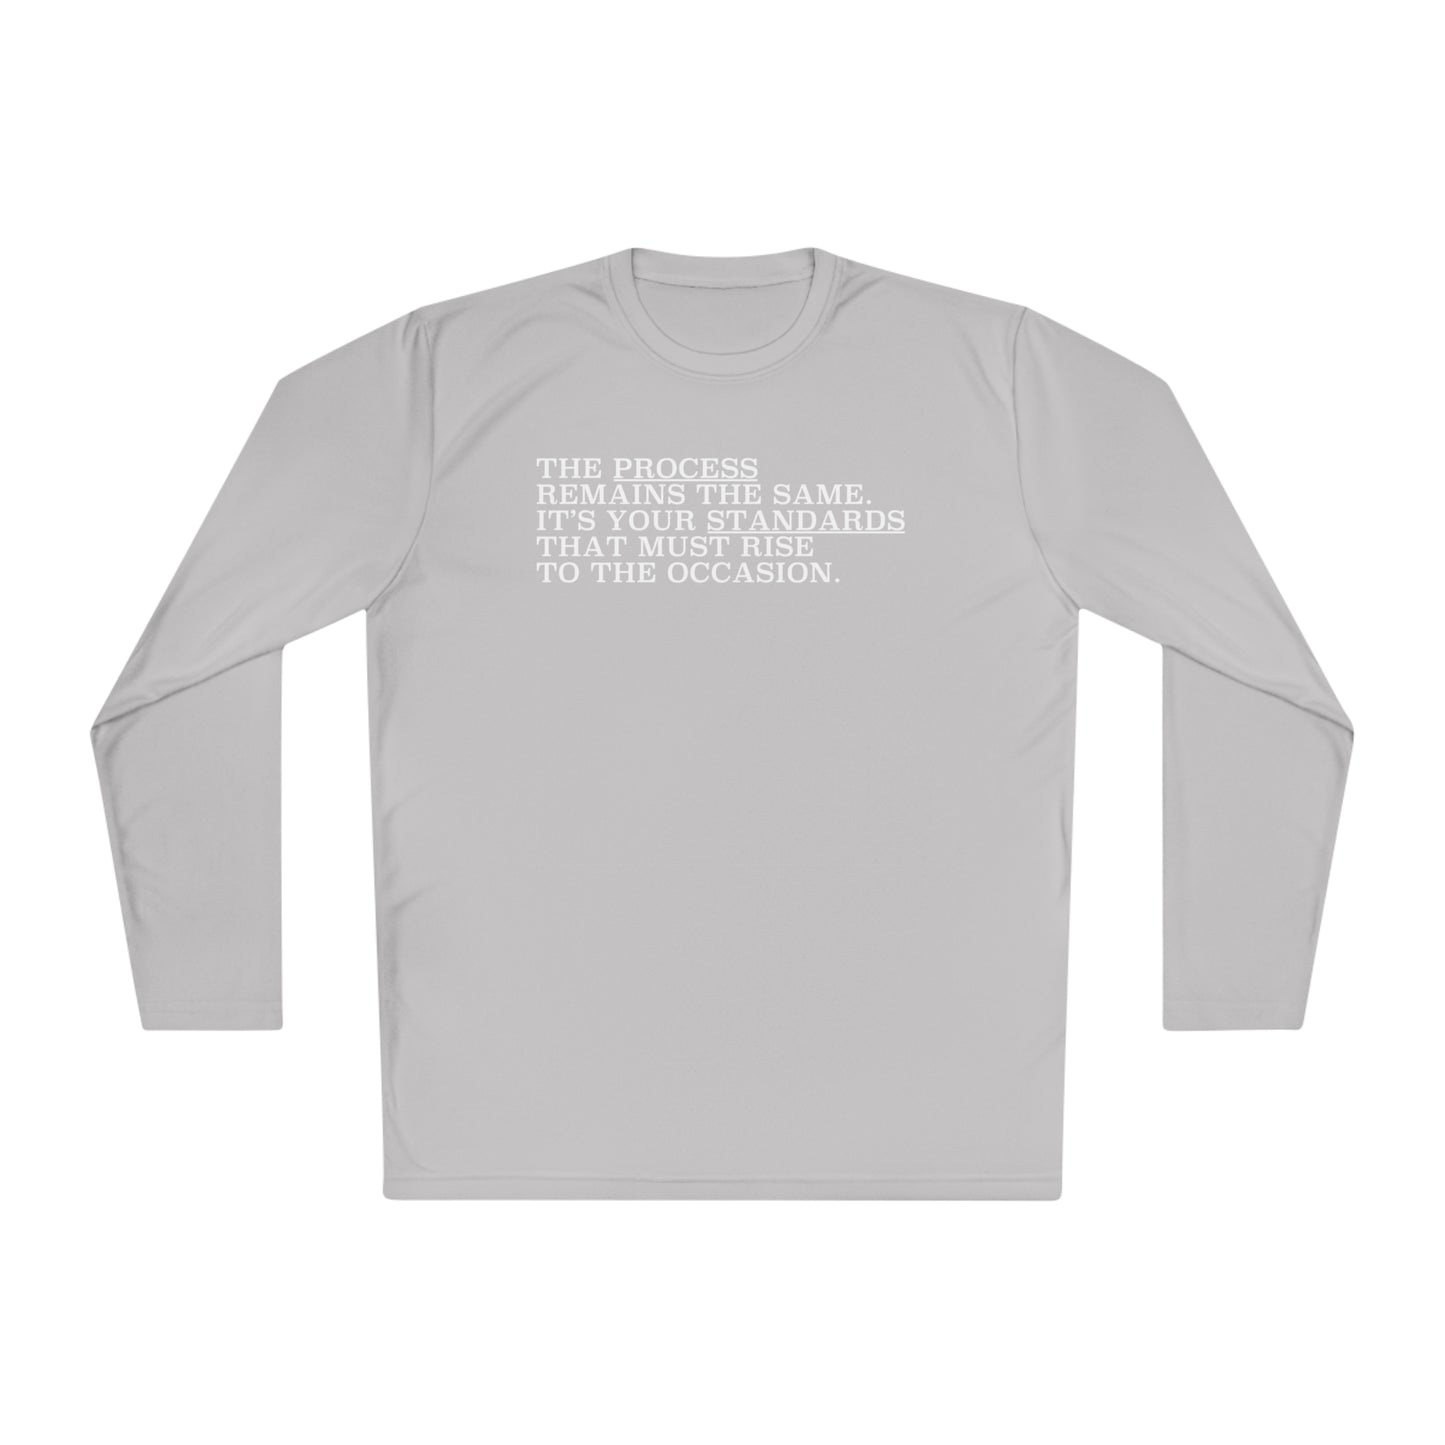 Standards Rise LS Tee